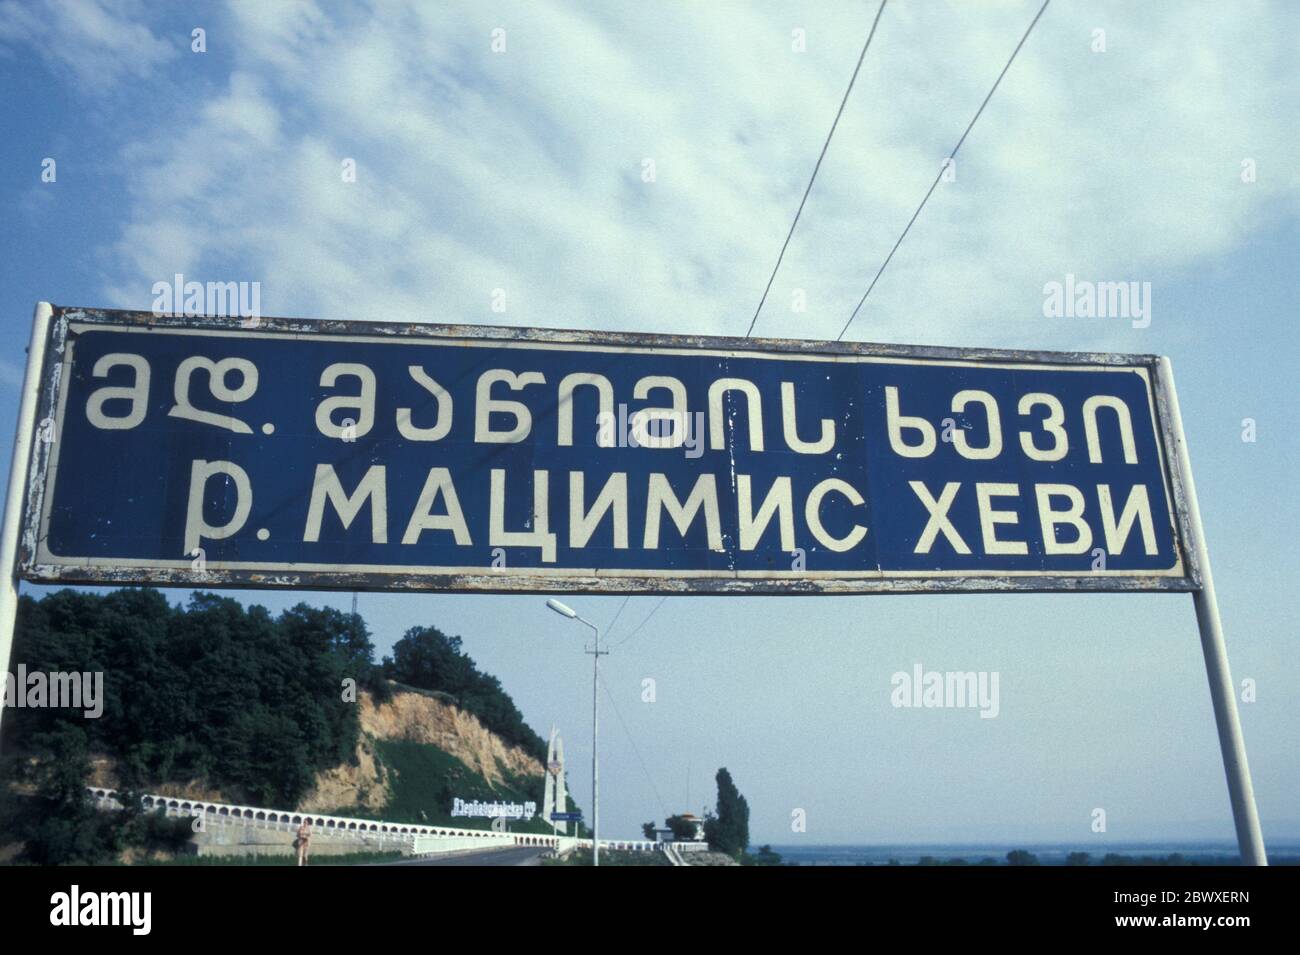 Road sign written in the Russian alphabet Stock Photo